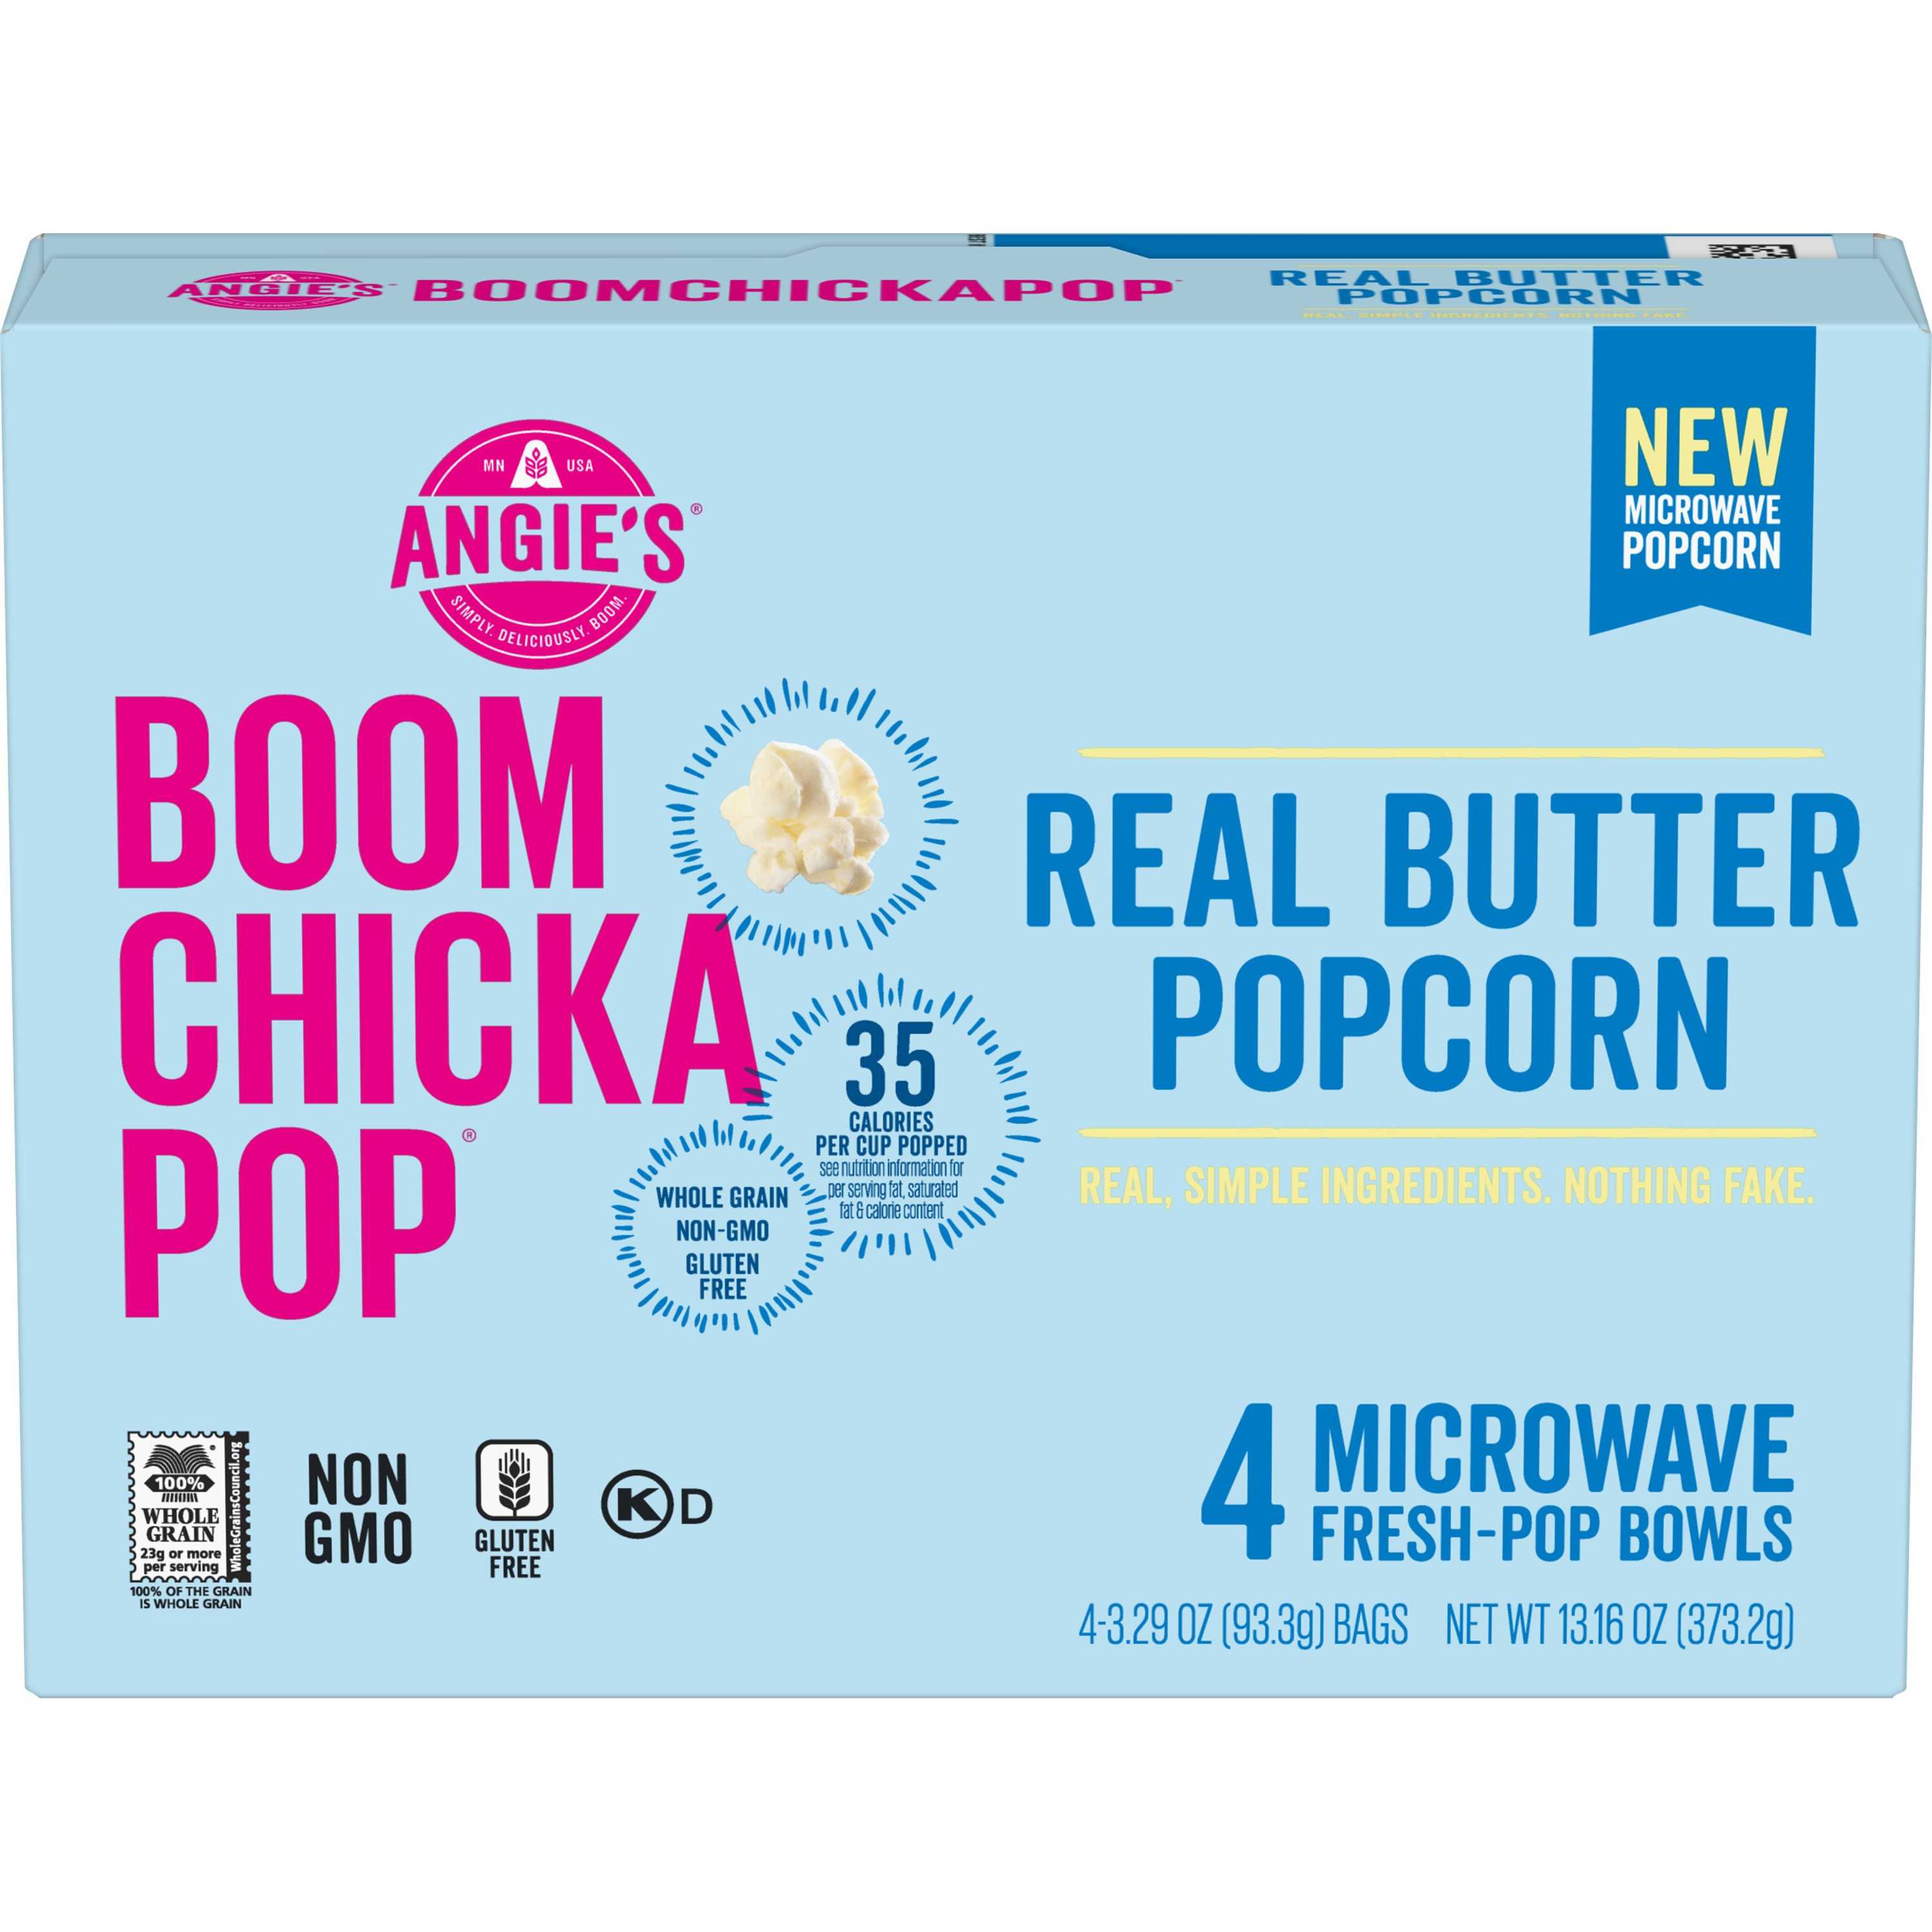 Angies BoomChickaPop Real Butter Microwave Popcorn 3.29 Oz. 4 Count